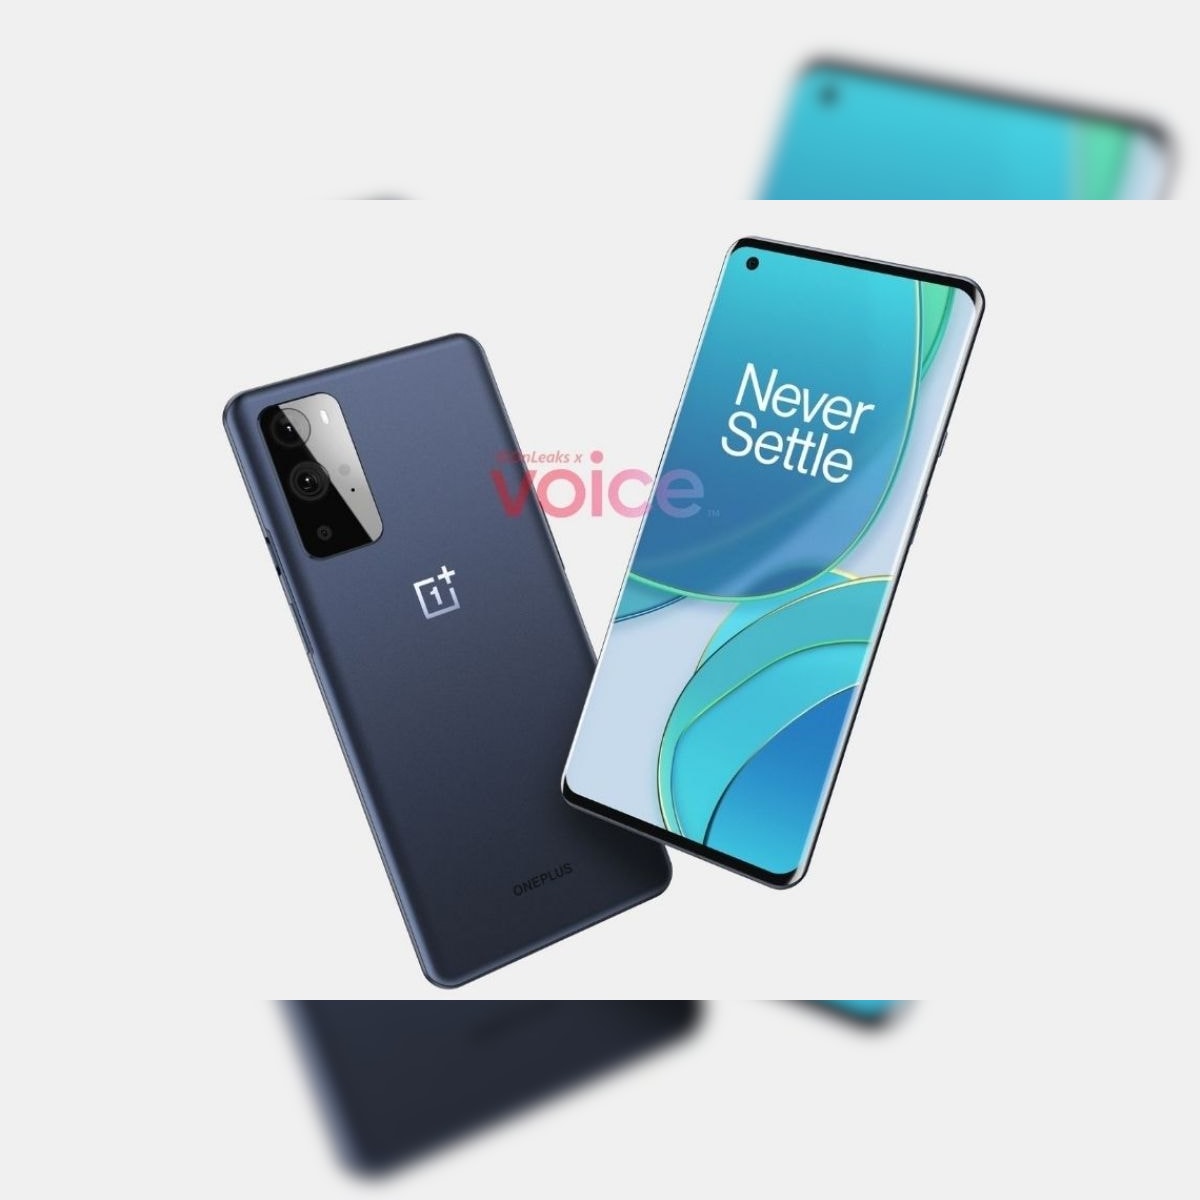 Oneplus 9 Lite With Snapdragon 865 Soc May Launch Alongside Oneplus 9 And 9 Pro